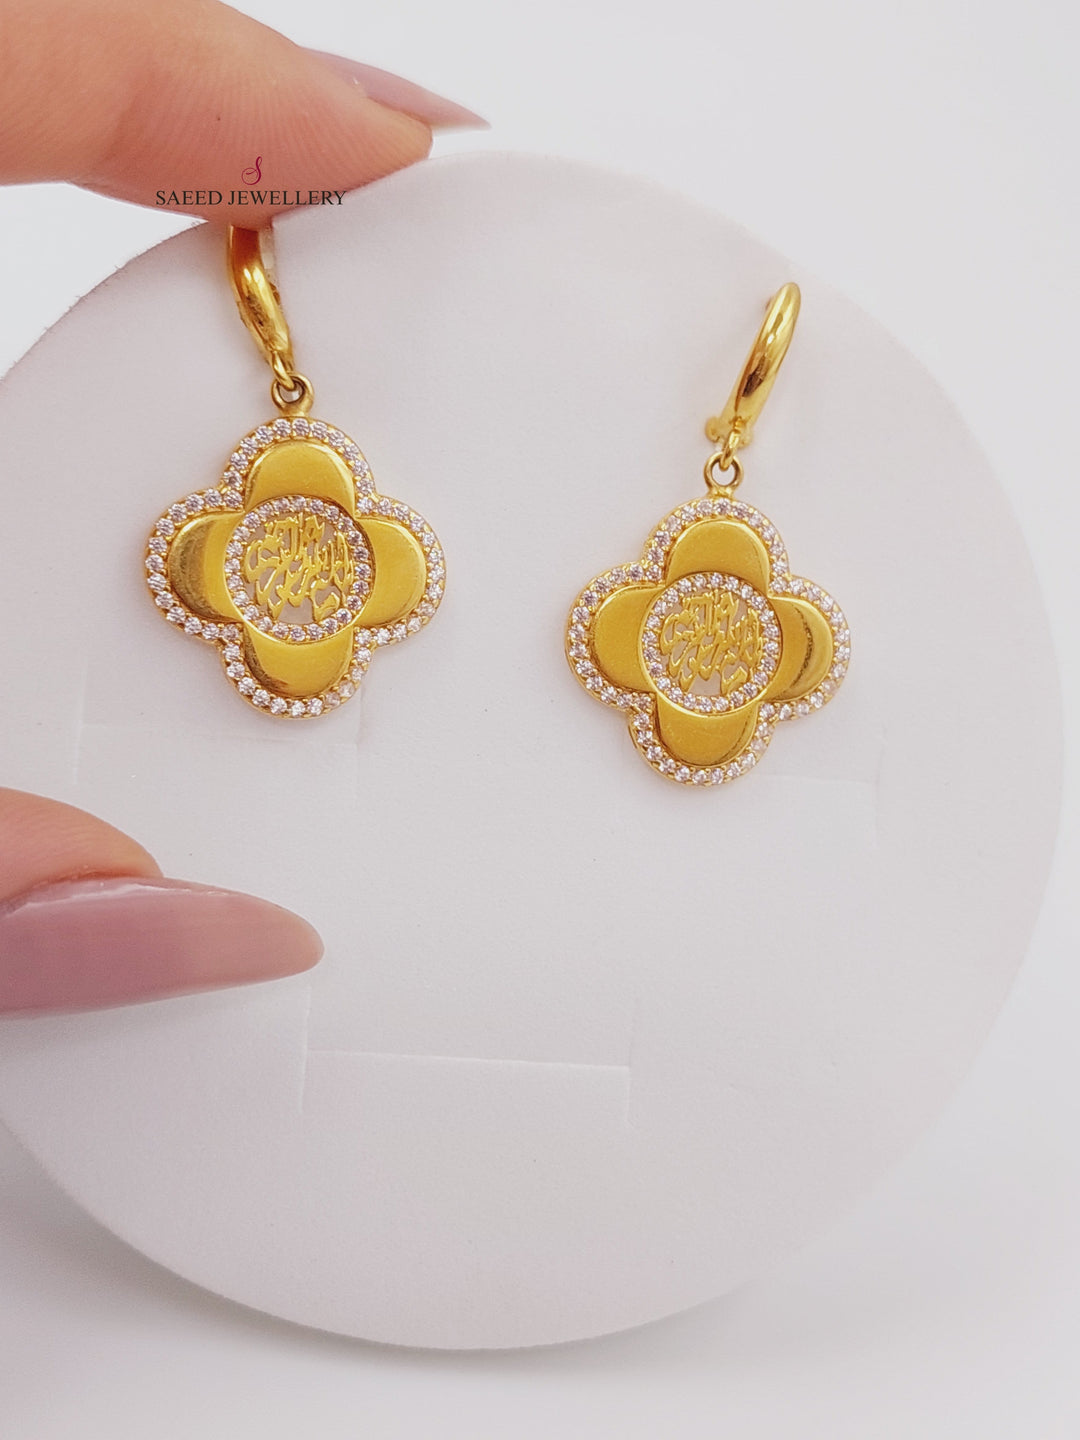 21K screwt Star Earrings Made of 21K Yellow Gold by Saeed Jewelry-حلق-اكسترا-34